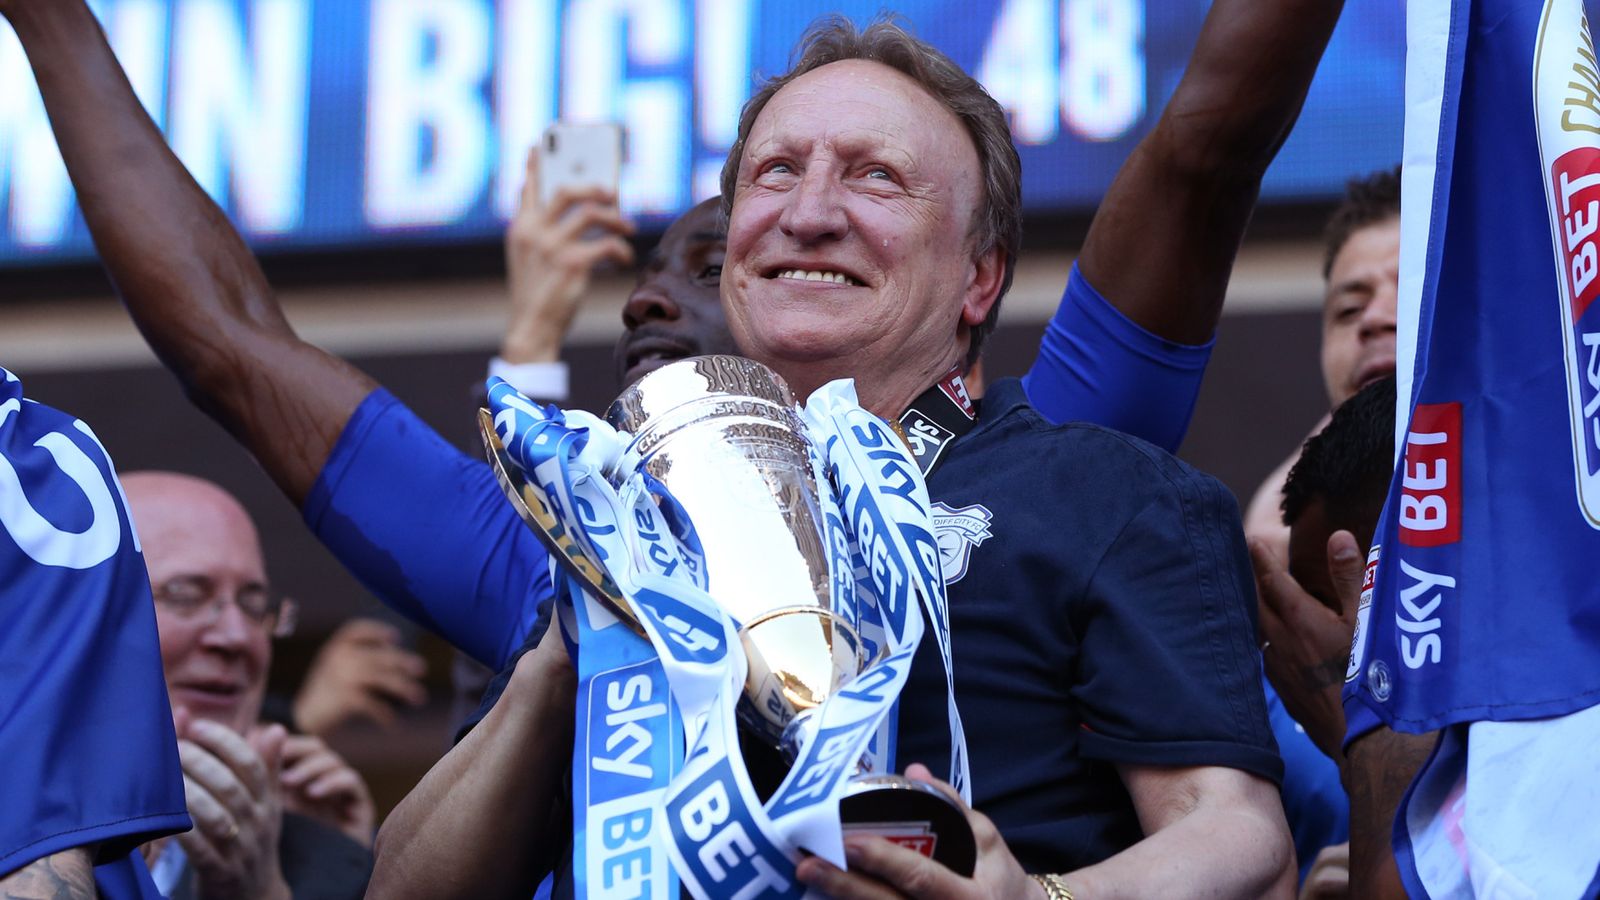 Neil Warnock announces retirement from football aged 73 after 42 years in manage..